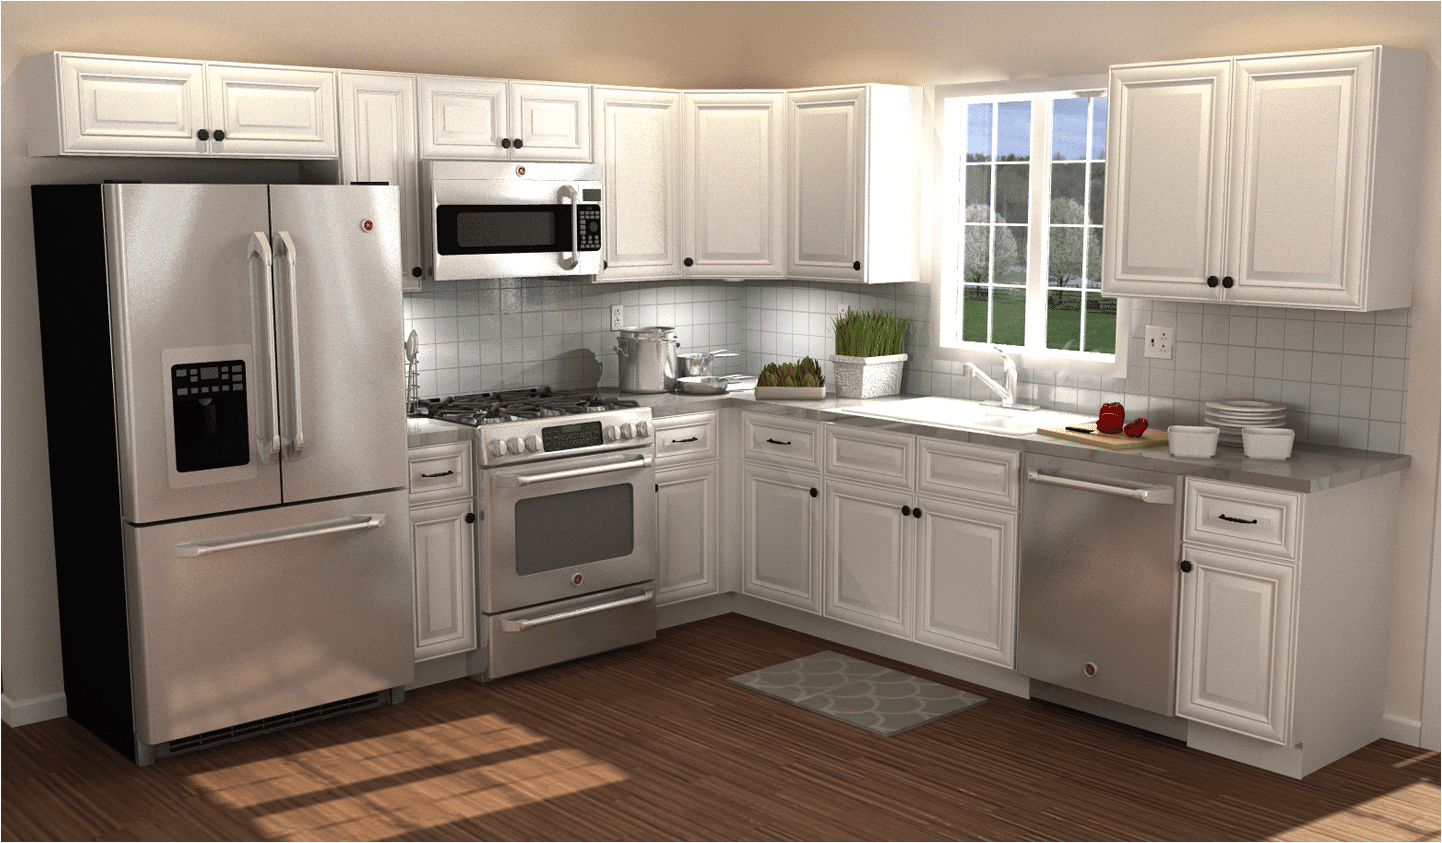 Kitchen Trends Fading Away